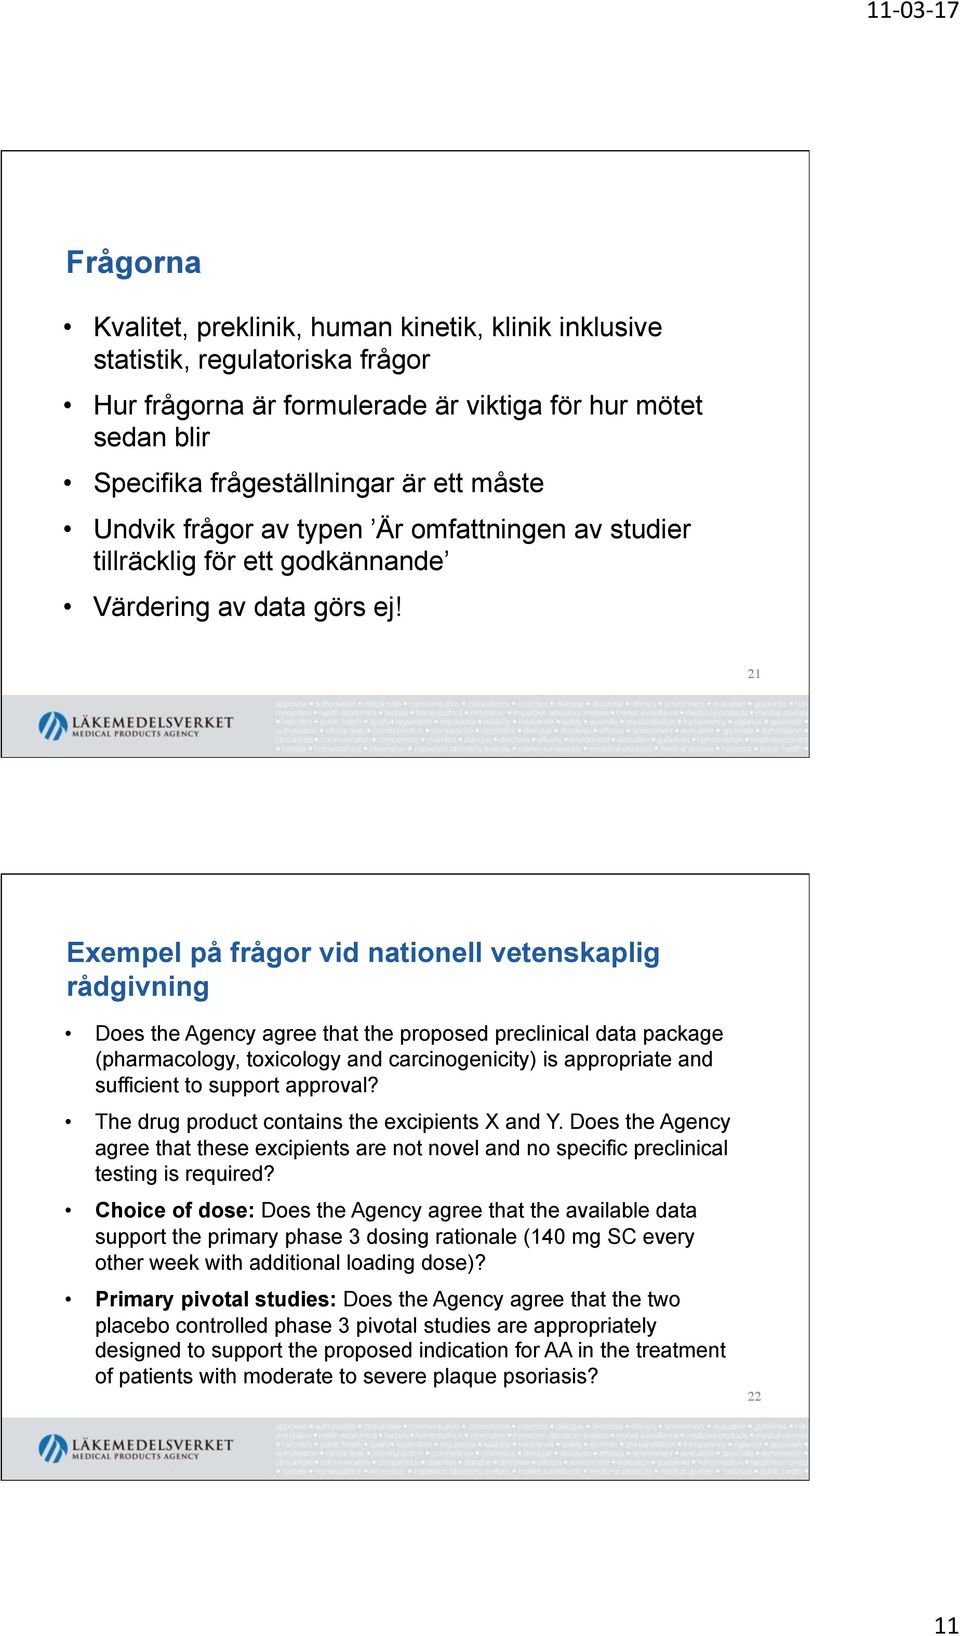 21 Exempel på frågor vid nationell vetenskaplig rådgivning Does the Agency agree that the proposed preclinical data package (pharmacology, toxicology and carcinogenicity) is appropriate and